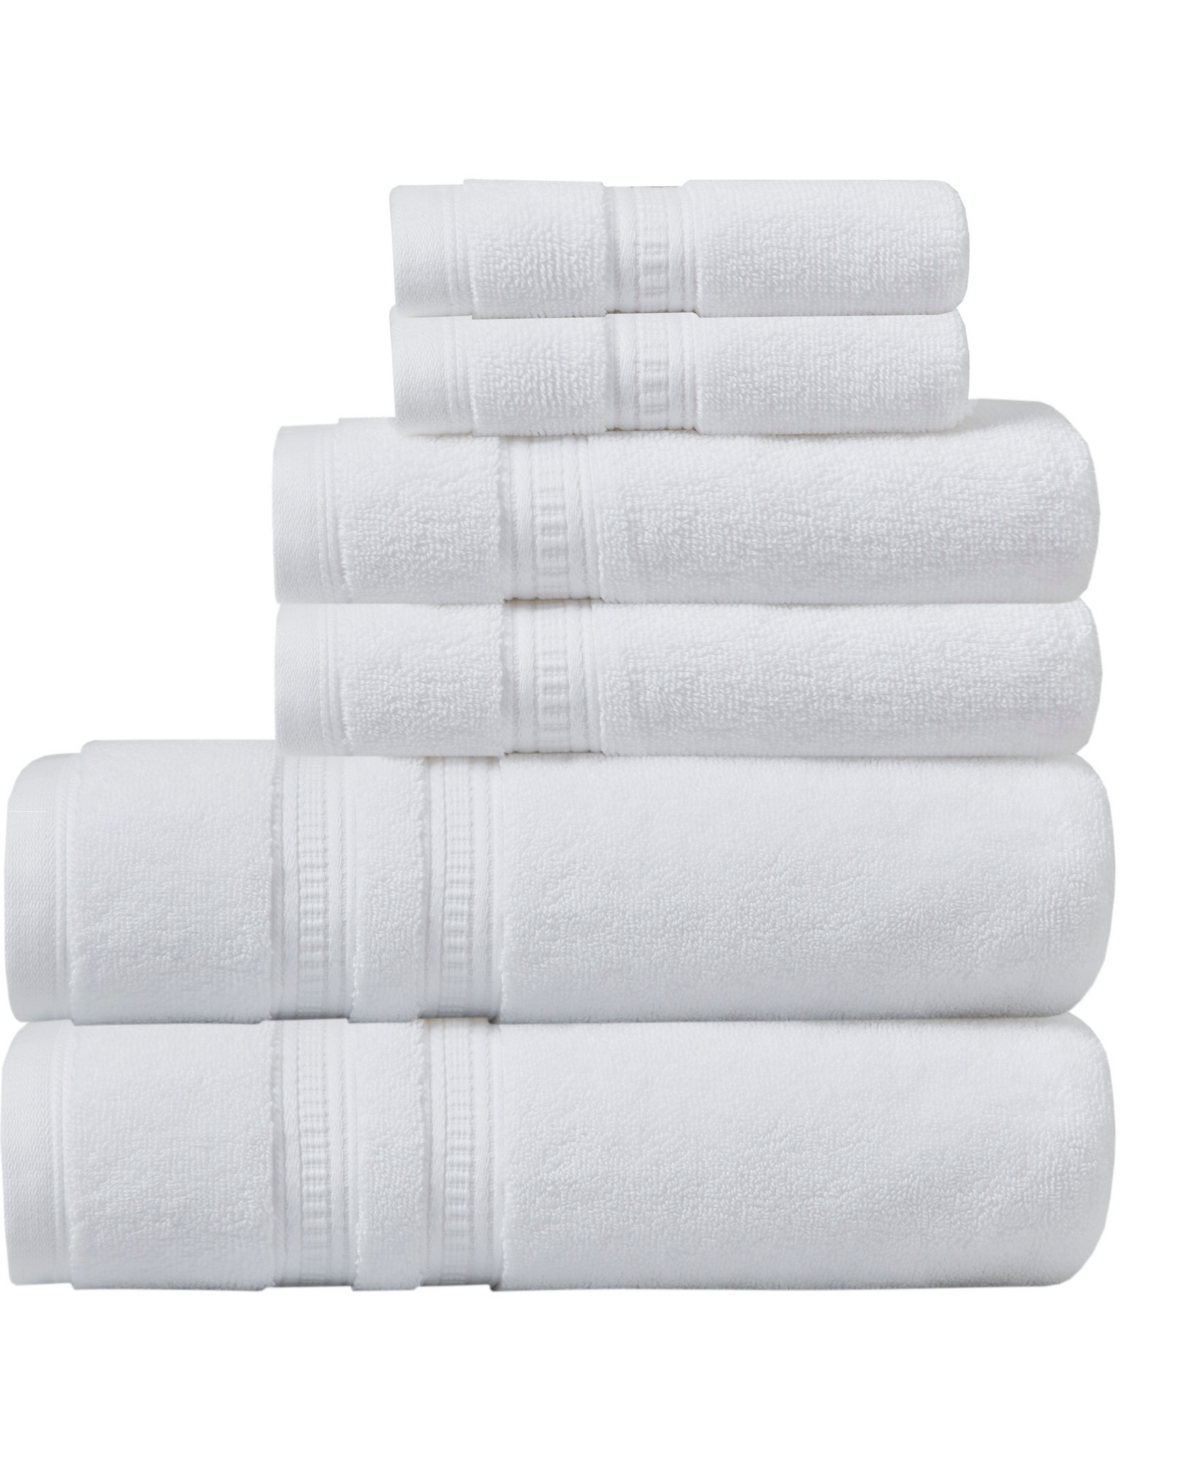 Beautyrest Plume Feather Touch Silvadur Cotton 6pc. Towel Set Bedding In White